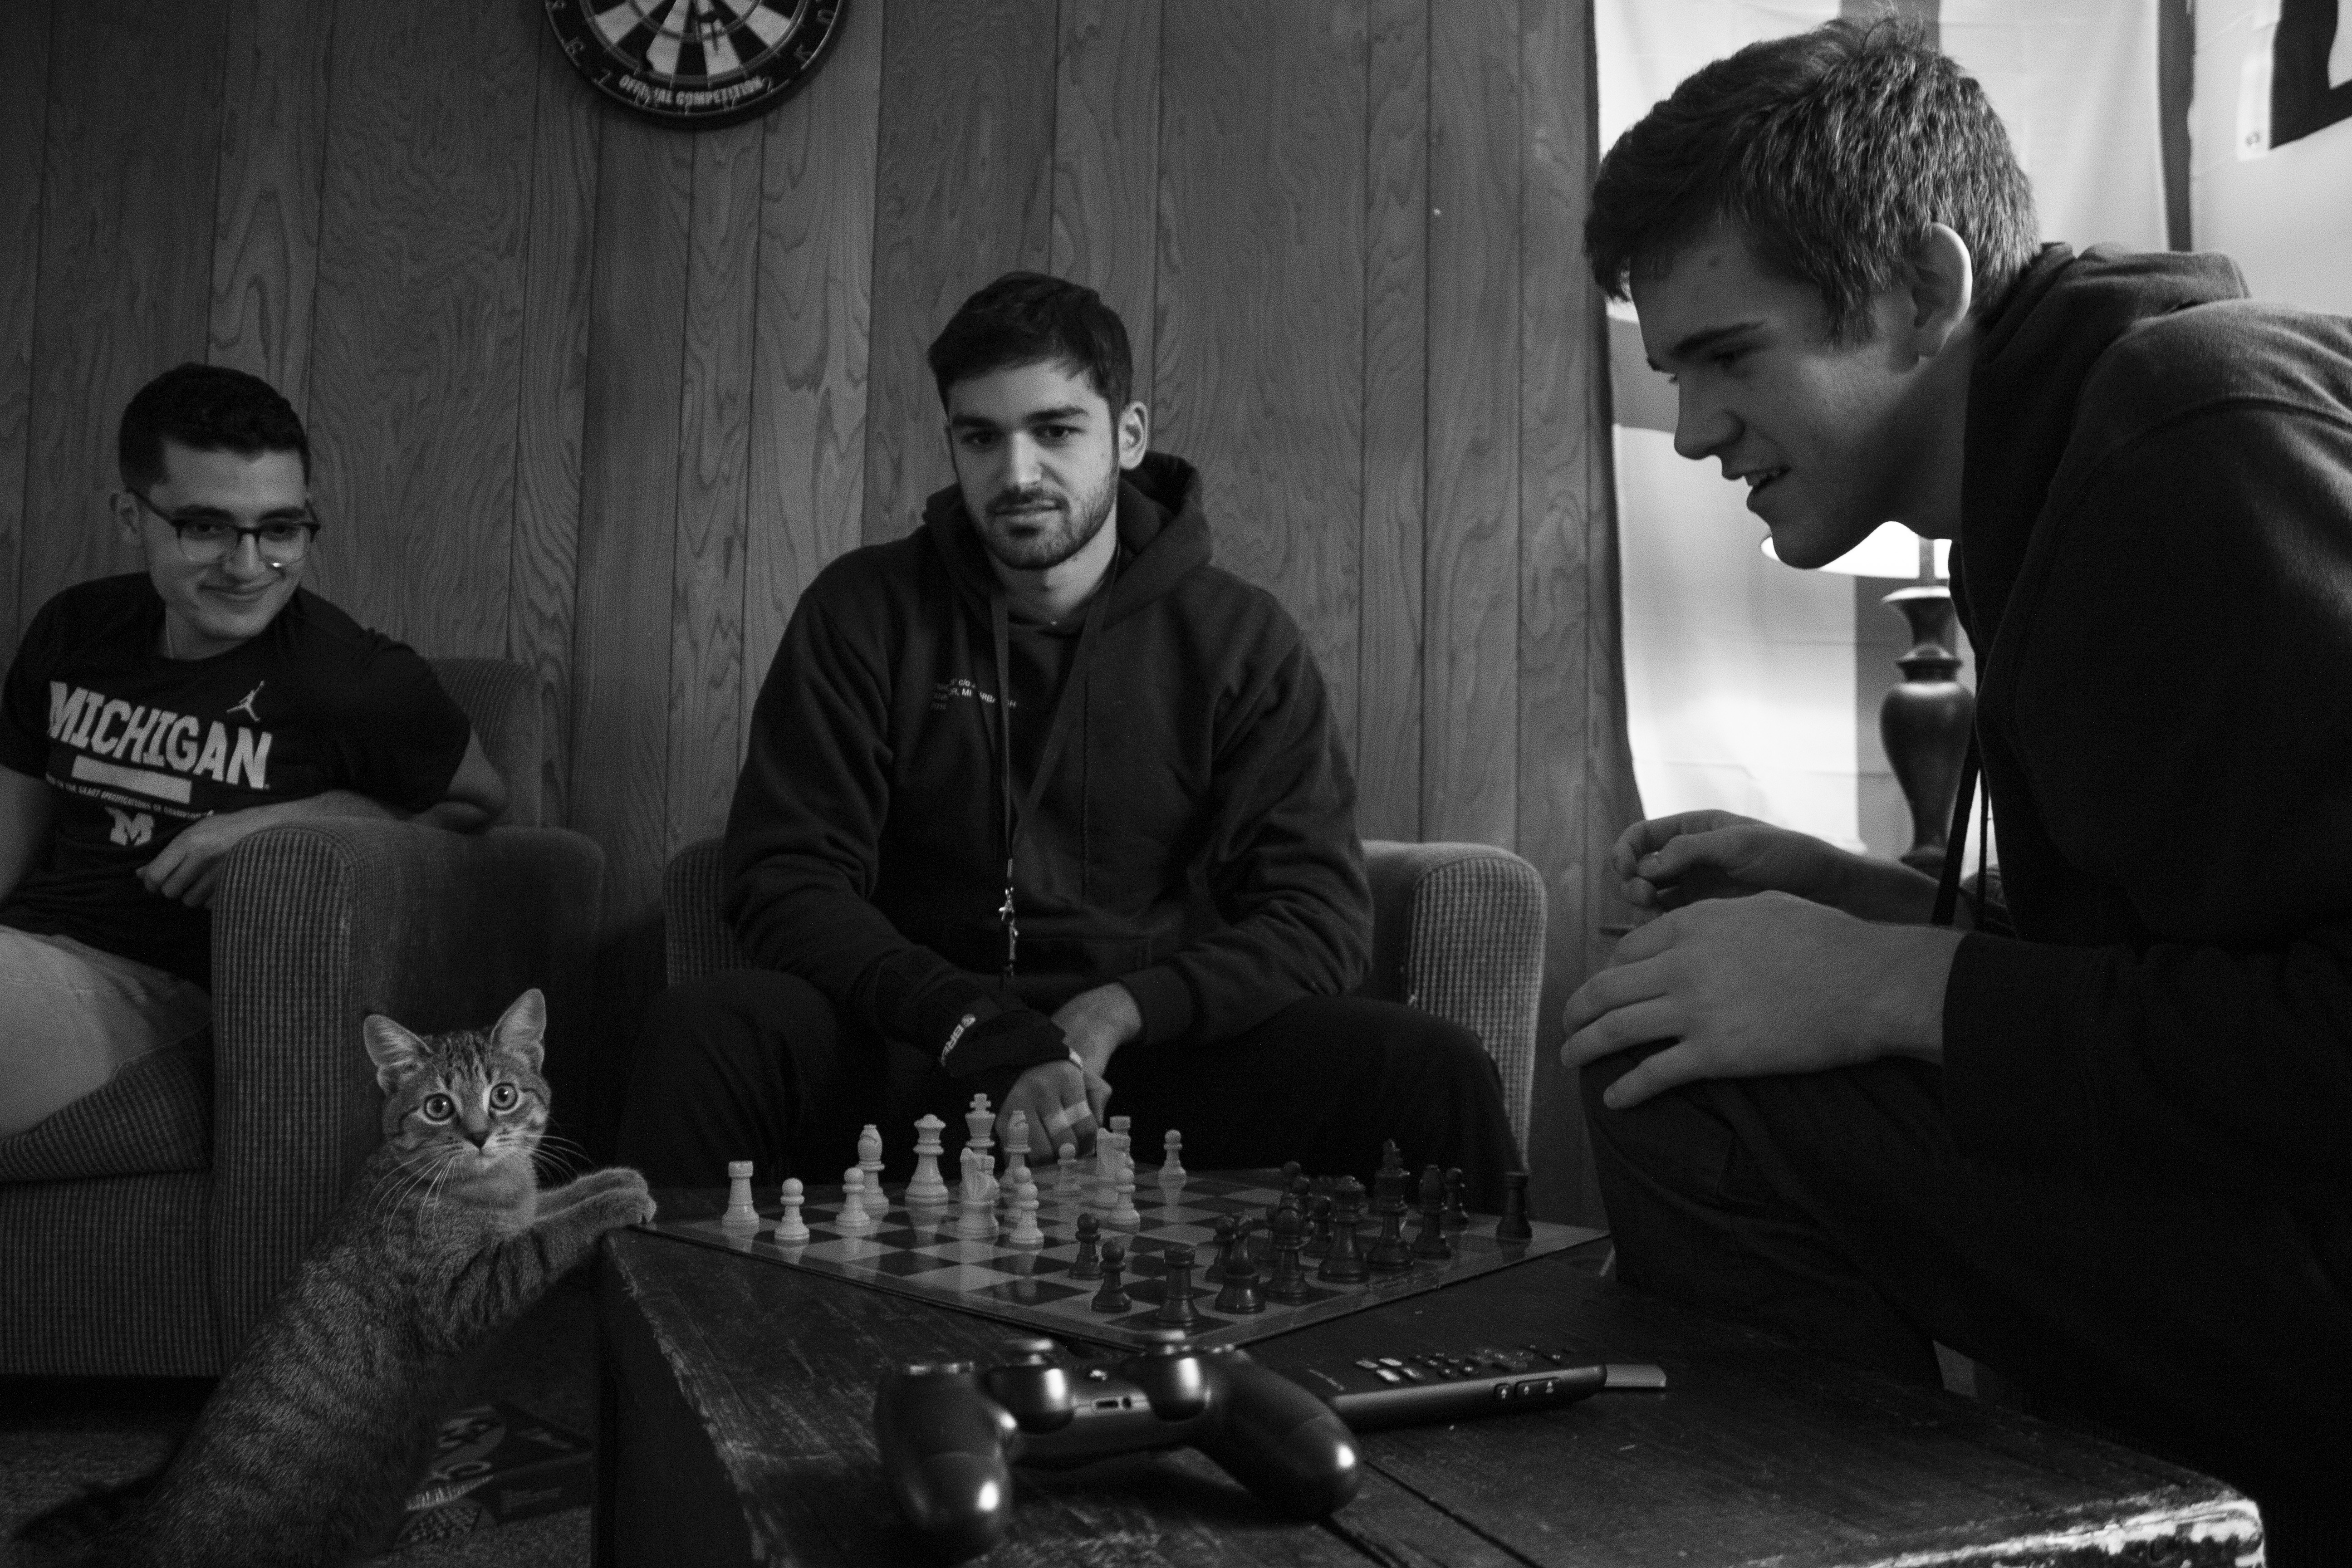 Grayson Buning Yousef Kobeissi and Christian Kassab watching Chani the cat try to play chess.